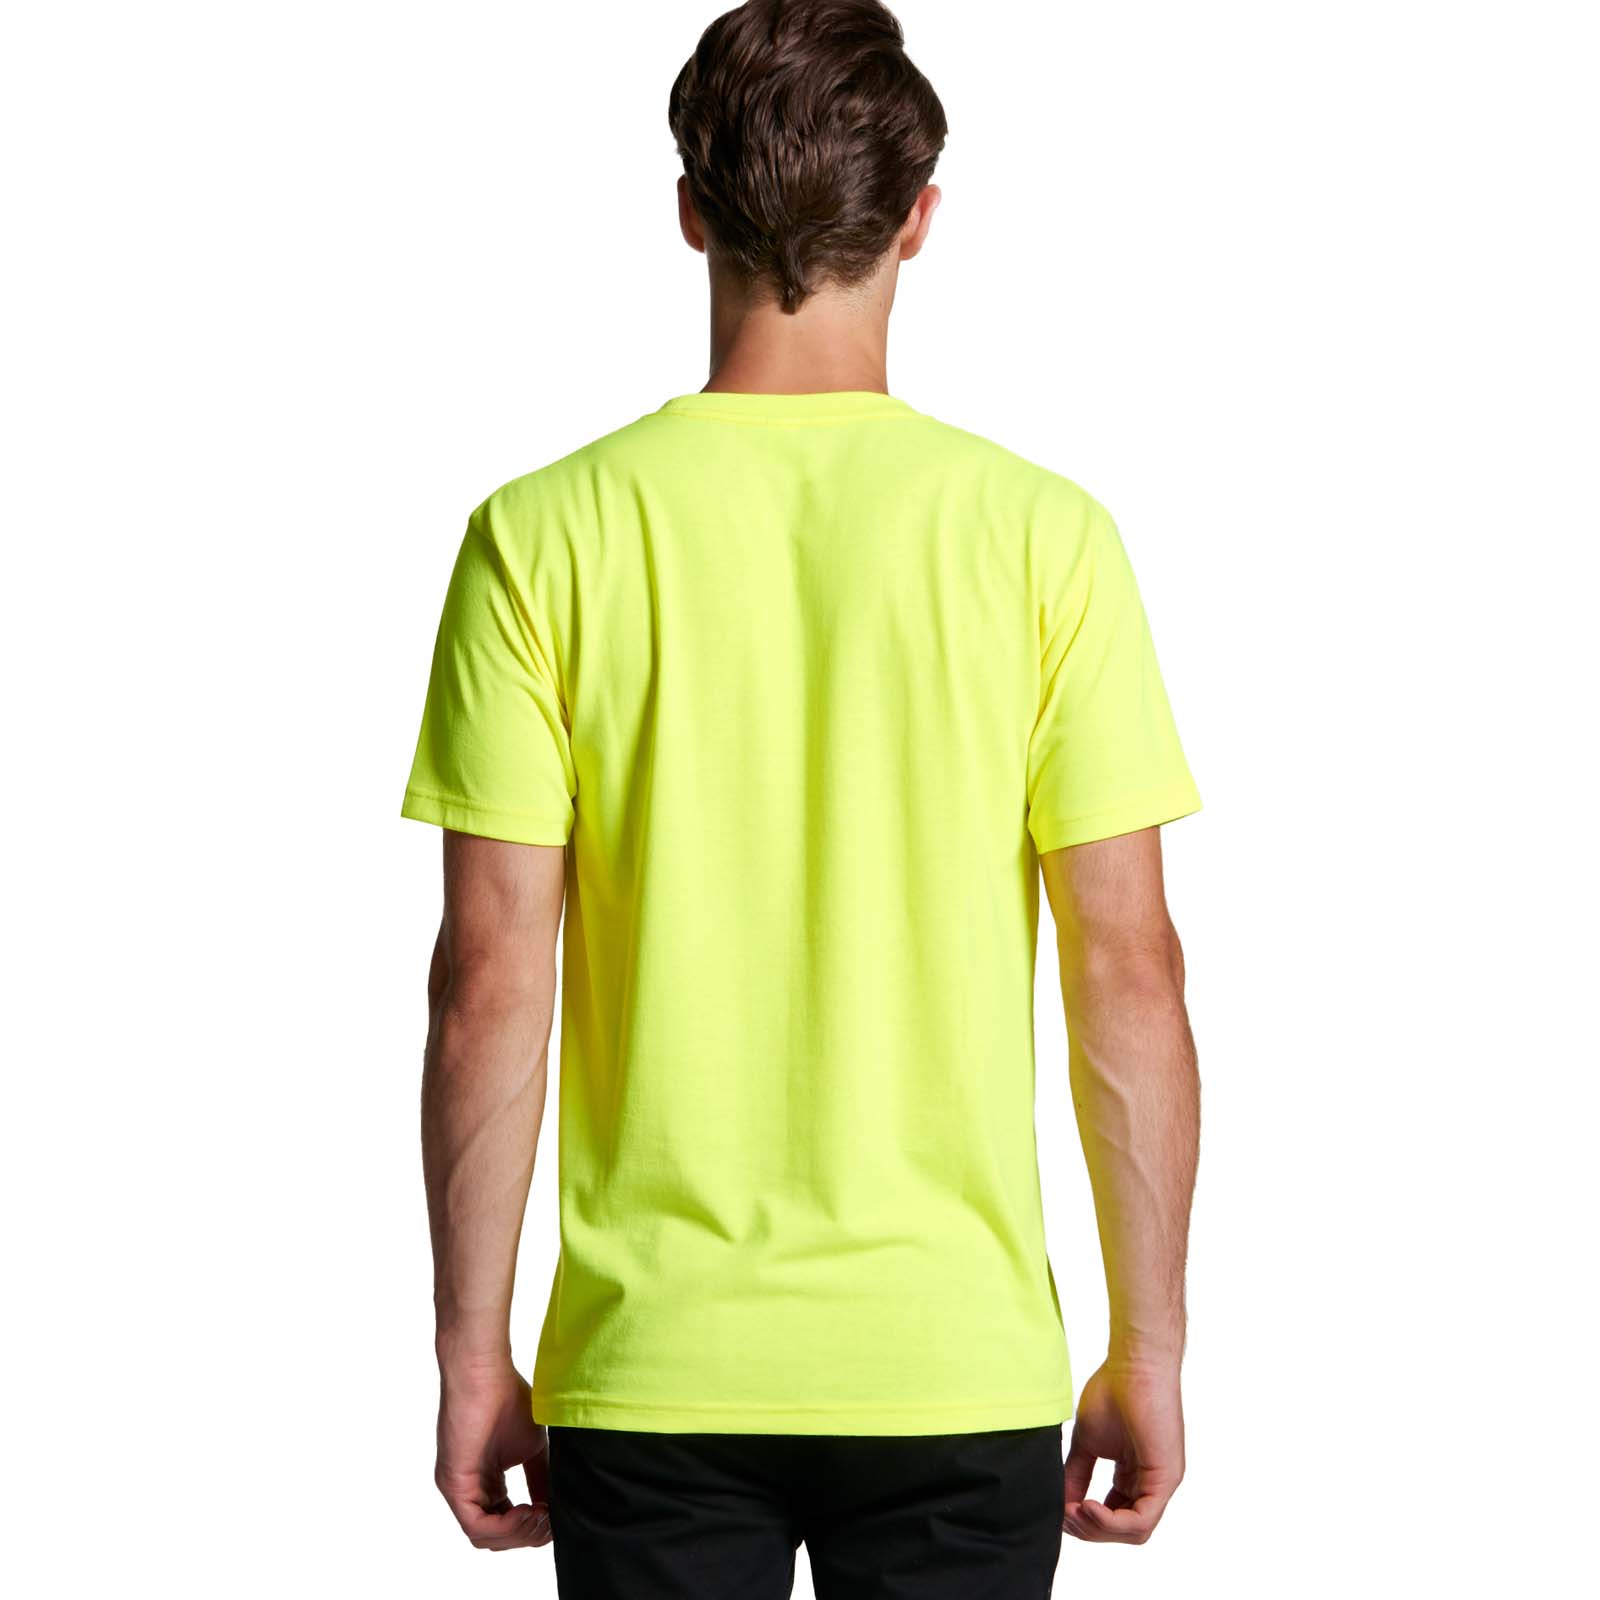 AS Colour Mens Block Safety Tee - 5050F - Back View